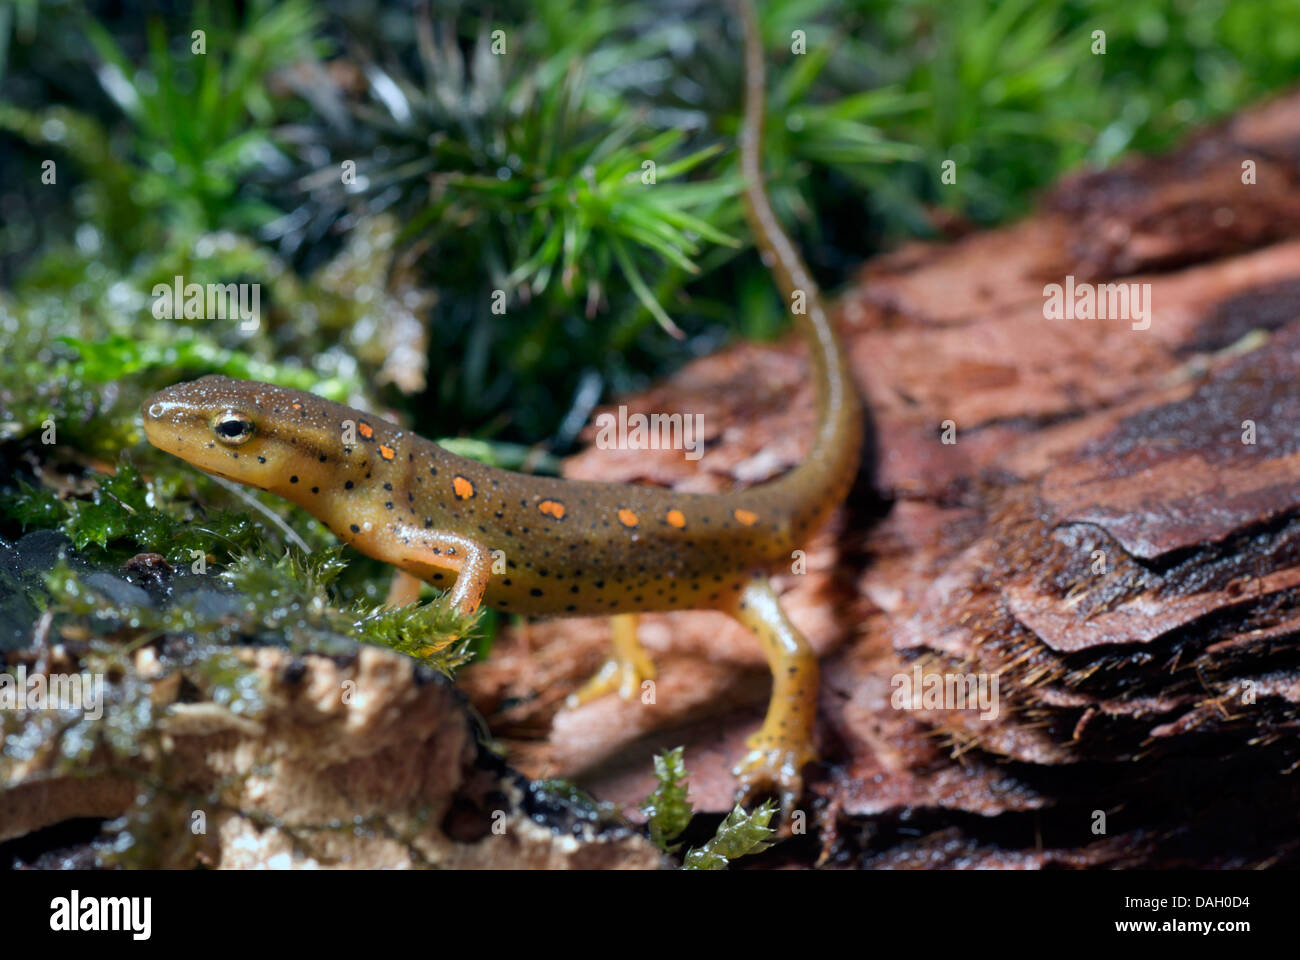 eft, red-spotted newt, red eft, eastern newt (Notophthalmus viridescens), on a stone Stock Photo